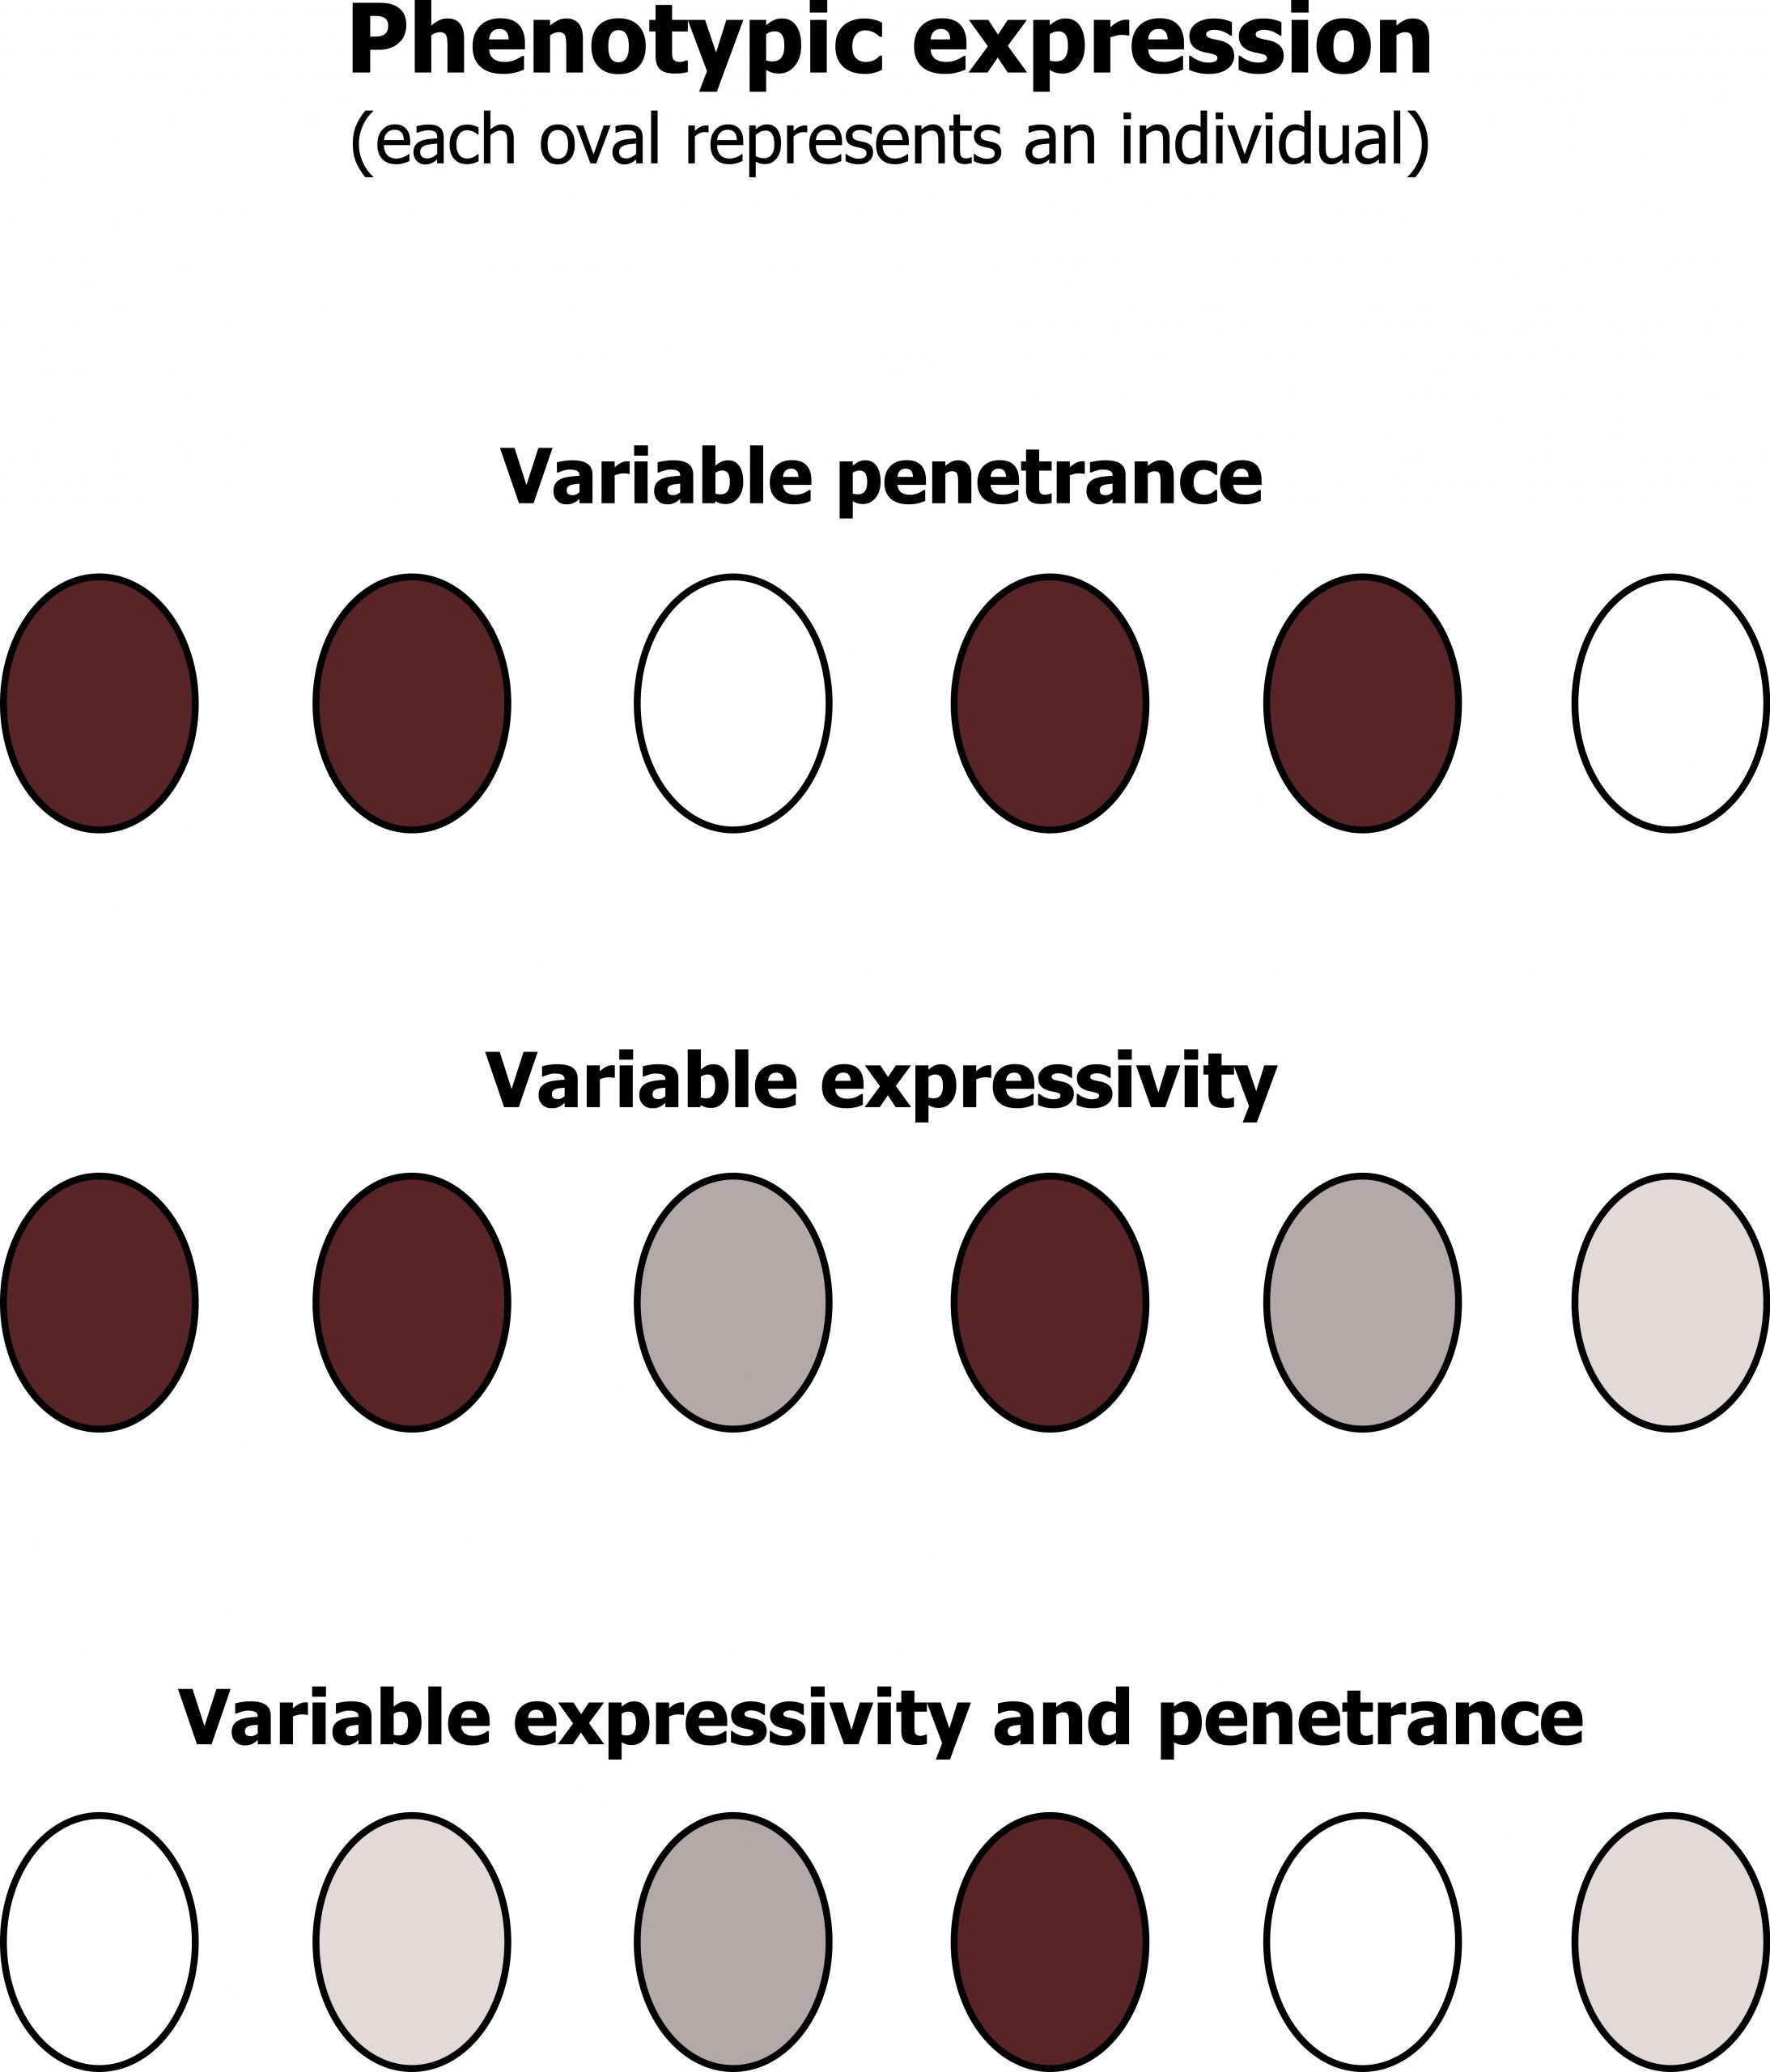 Phenotypic expression (each oval represents an individual). Variable penetrance: 4 purple, 2 white. Variable expressivity: 3 purple, 1 pink, 2 Grey. Variable expressivity and penetrance: 1 purple, 2 white, 2 pink, 1 Grey.